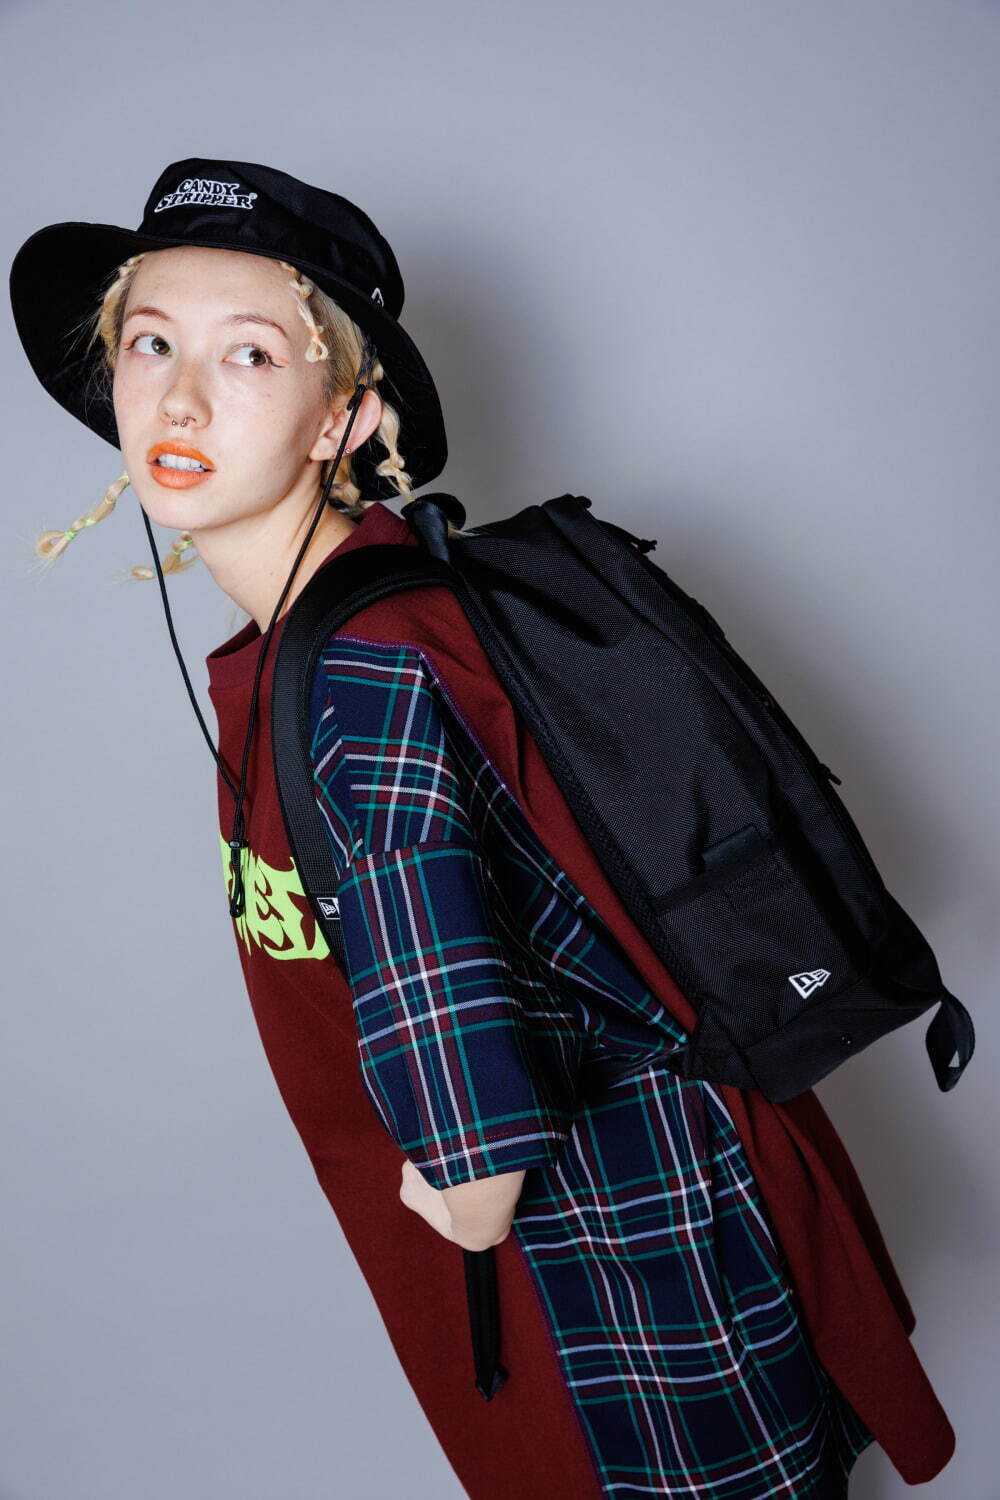 CANDY LOGO ADVENTURE LIGHT HAT 8,800円
CANDY UNION DAY PACK 13,200円